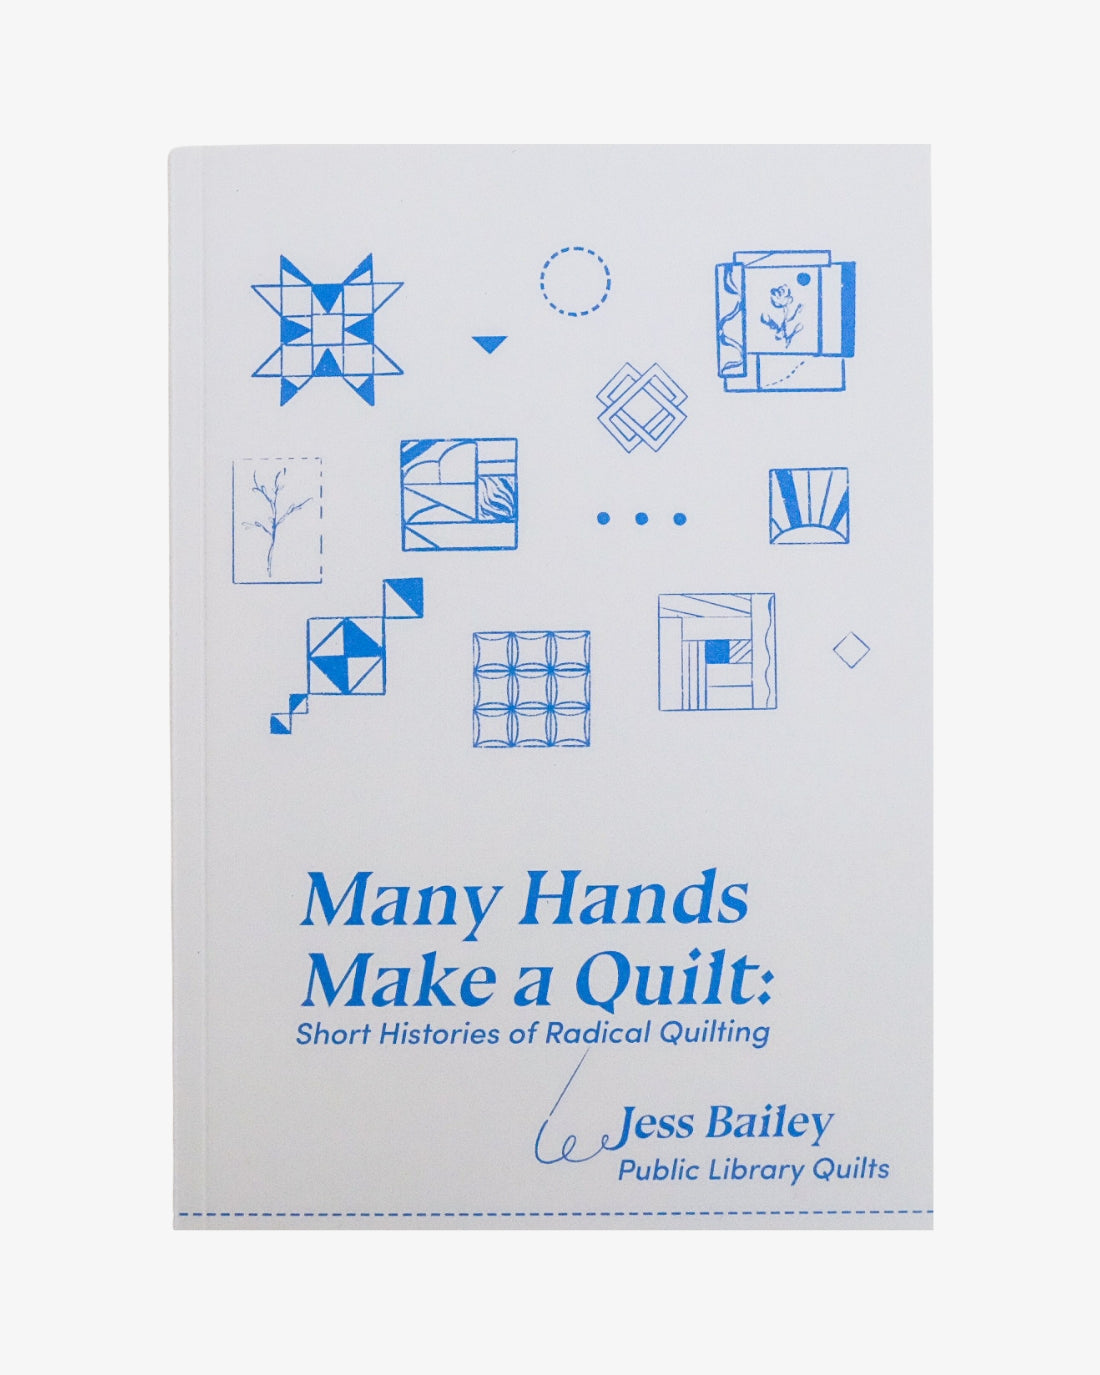 Many Hands Make a Quilt: Short Stories of Radical Quilting by Jess Bailey